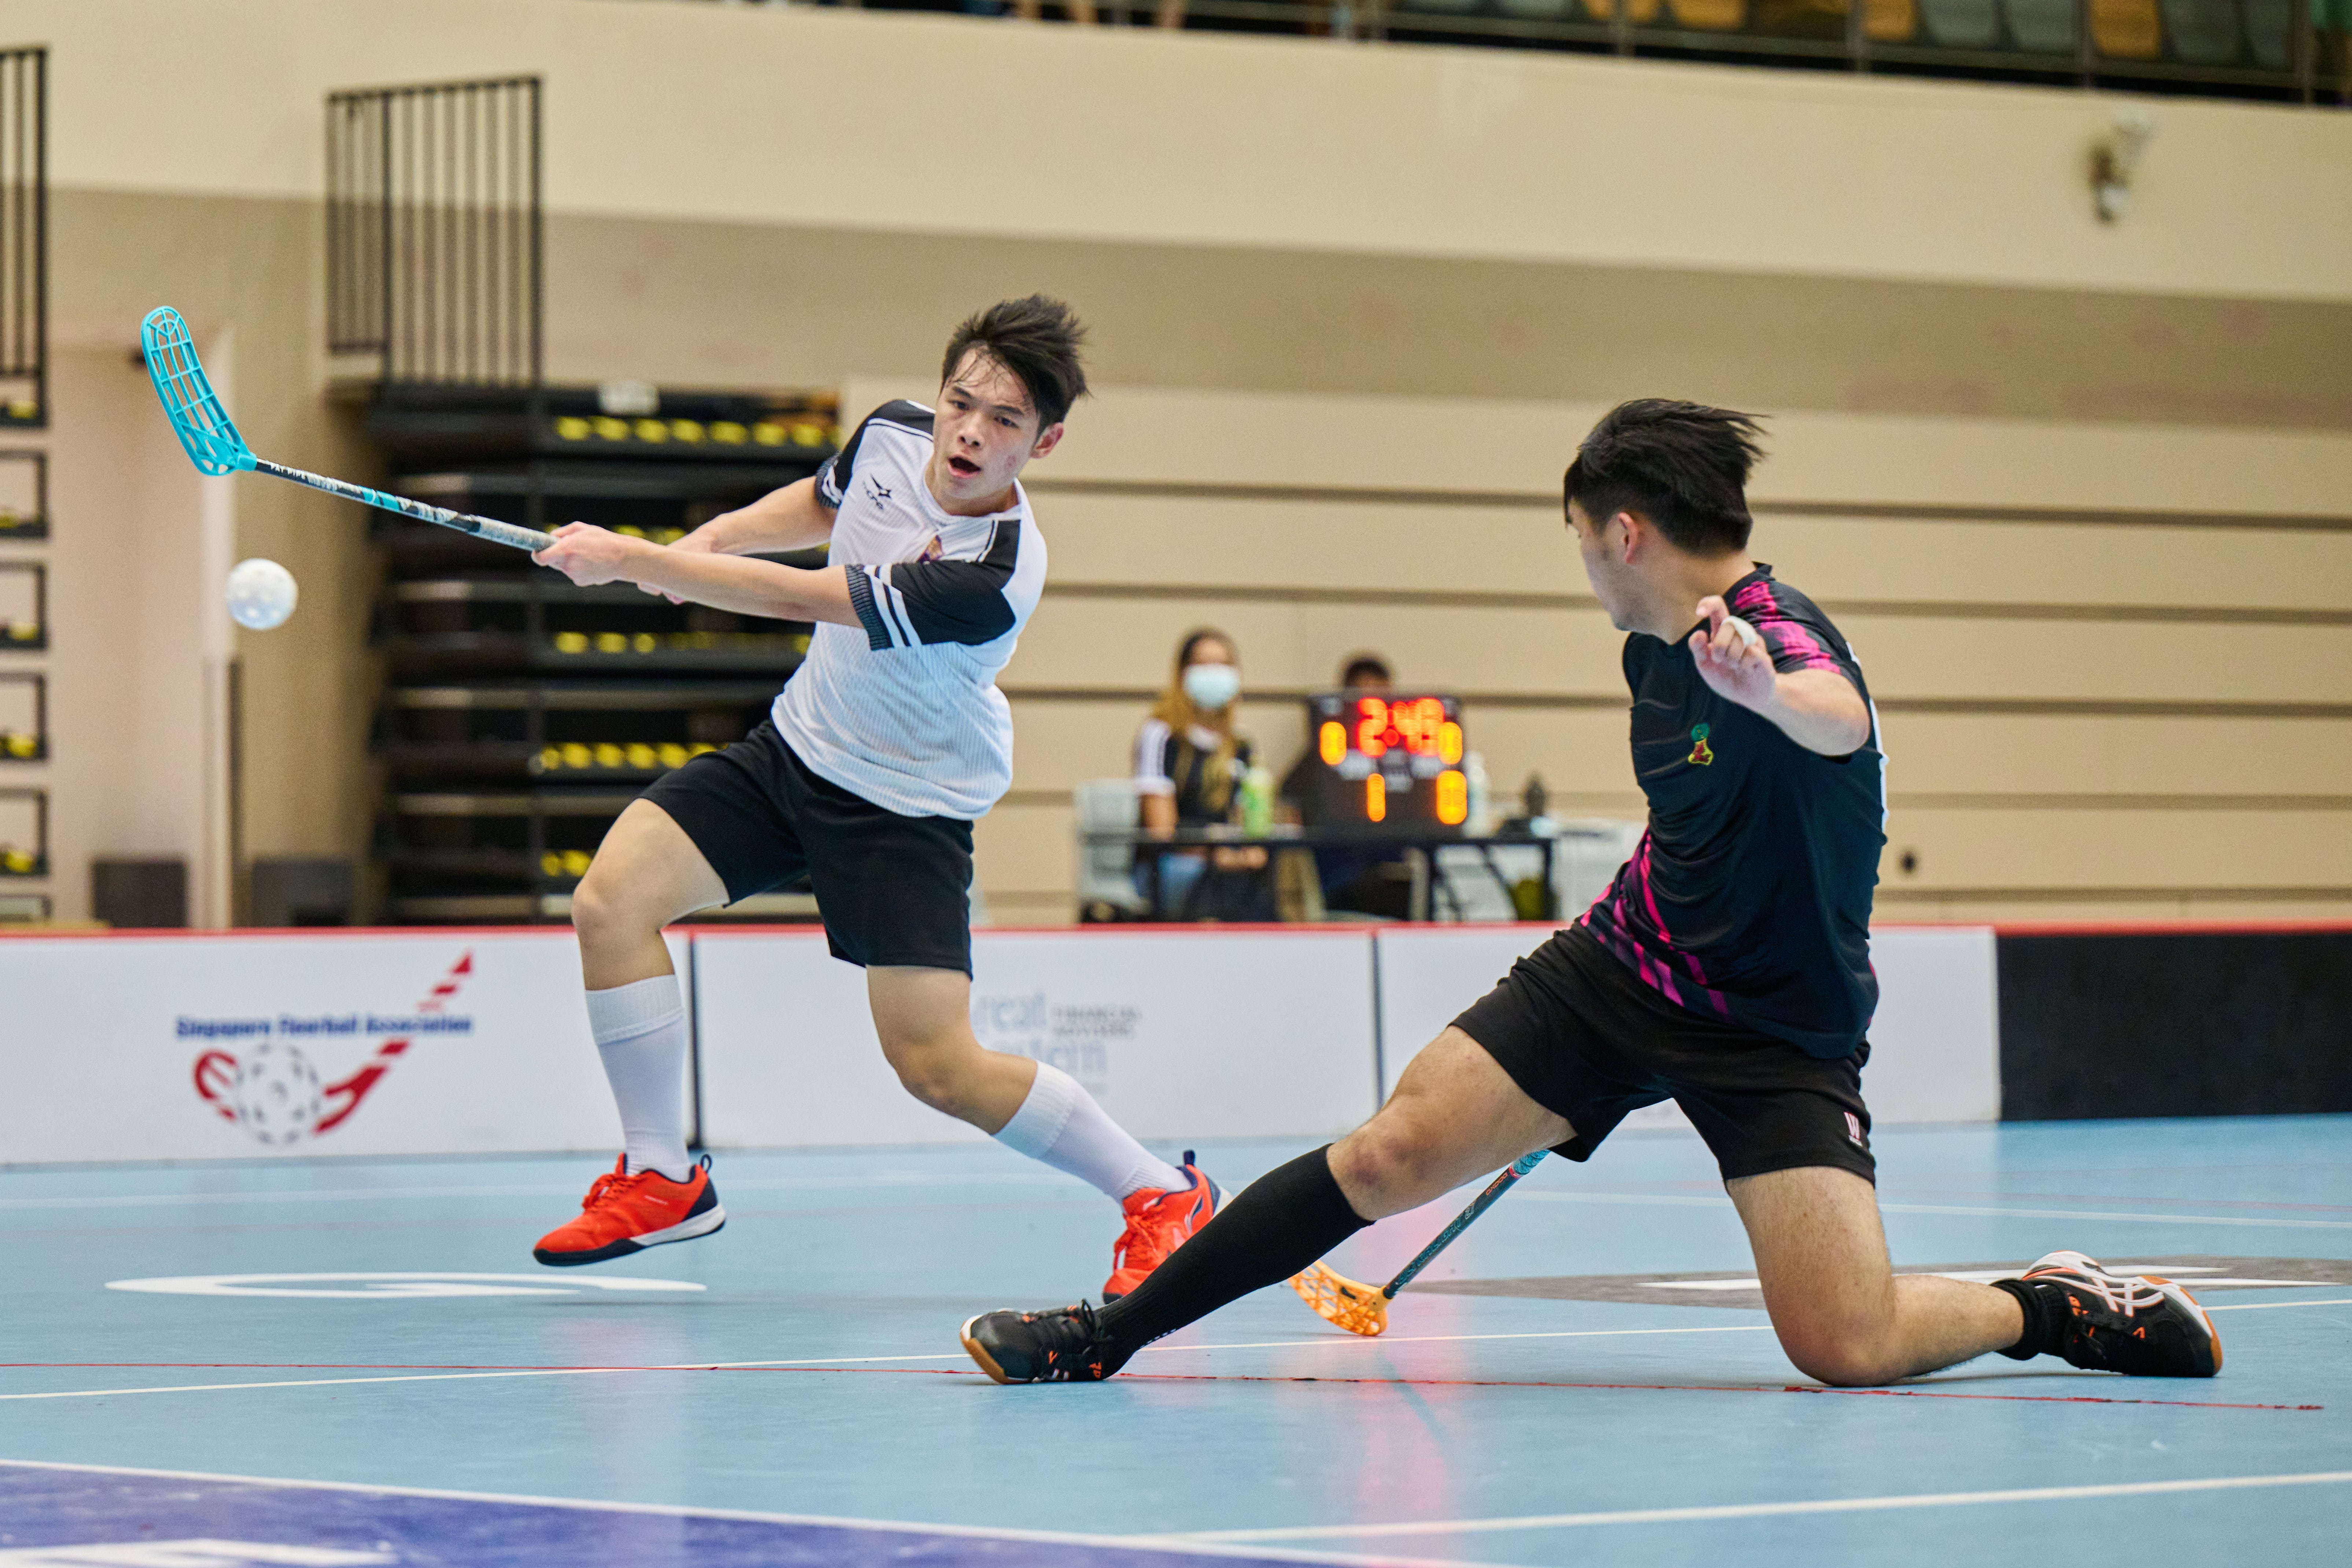 20220519_20220519 SSSC Floorball National A Div Boys Semi Finals Raffles Junior College Vs Anglo-Chinese Junior College_Siaw Woon Chong_0029